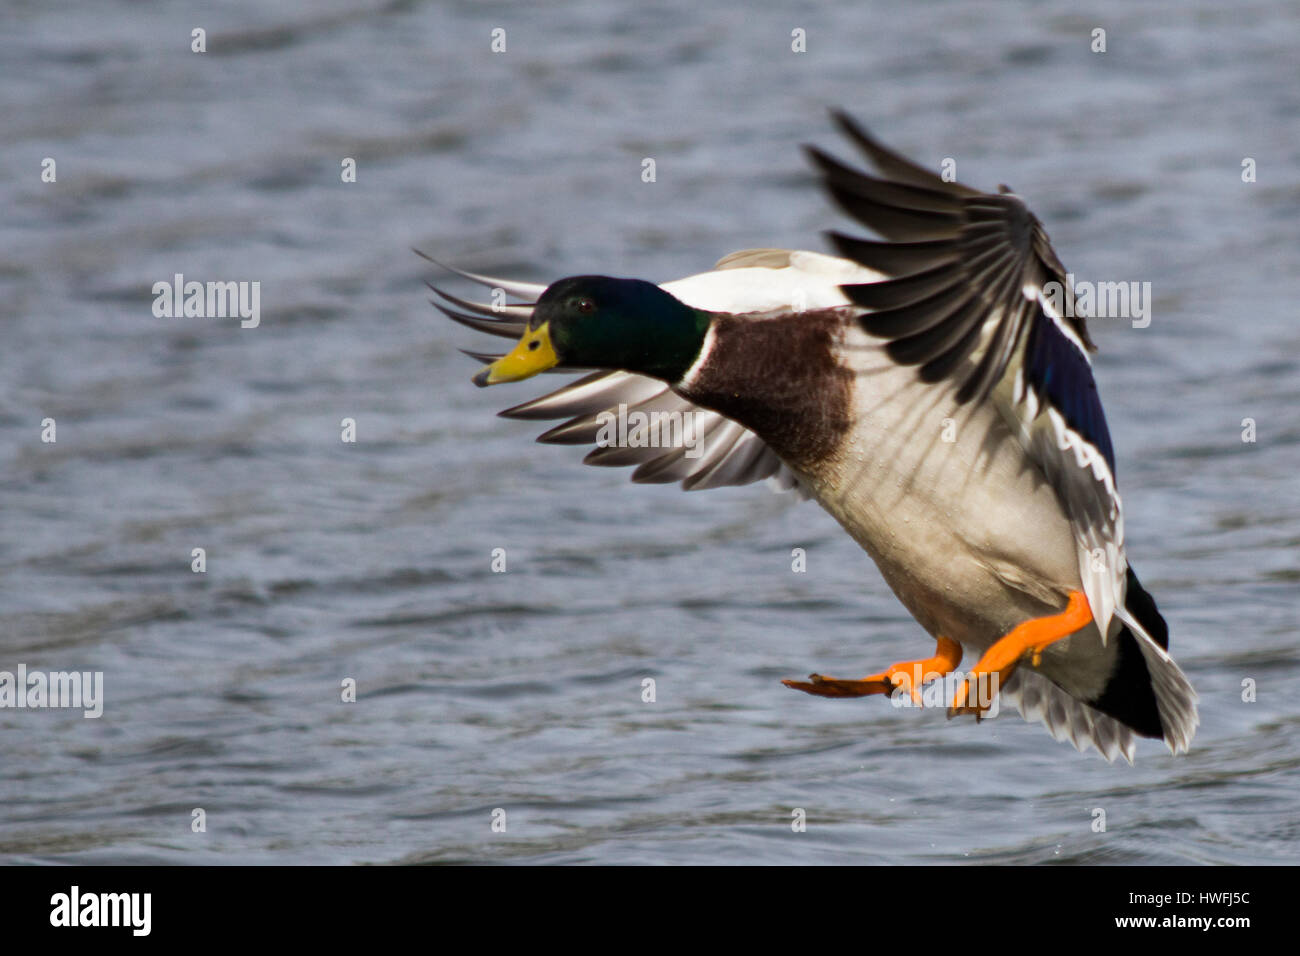 Male mallard duck with wings outstretched approaching a landing on water Stock Photo